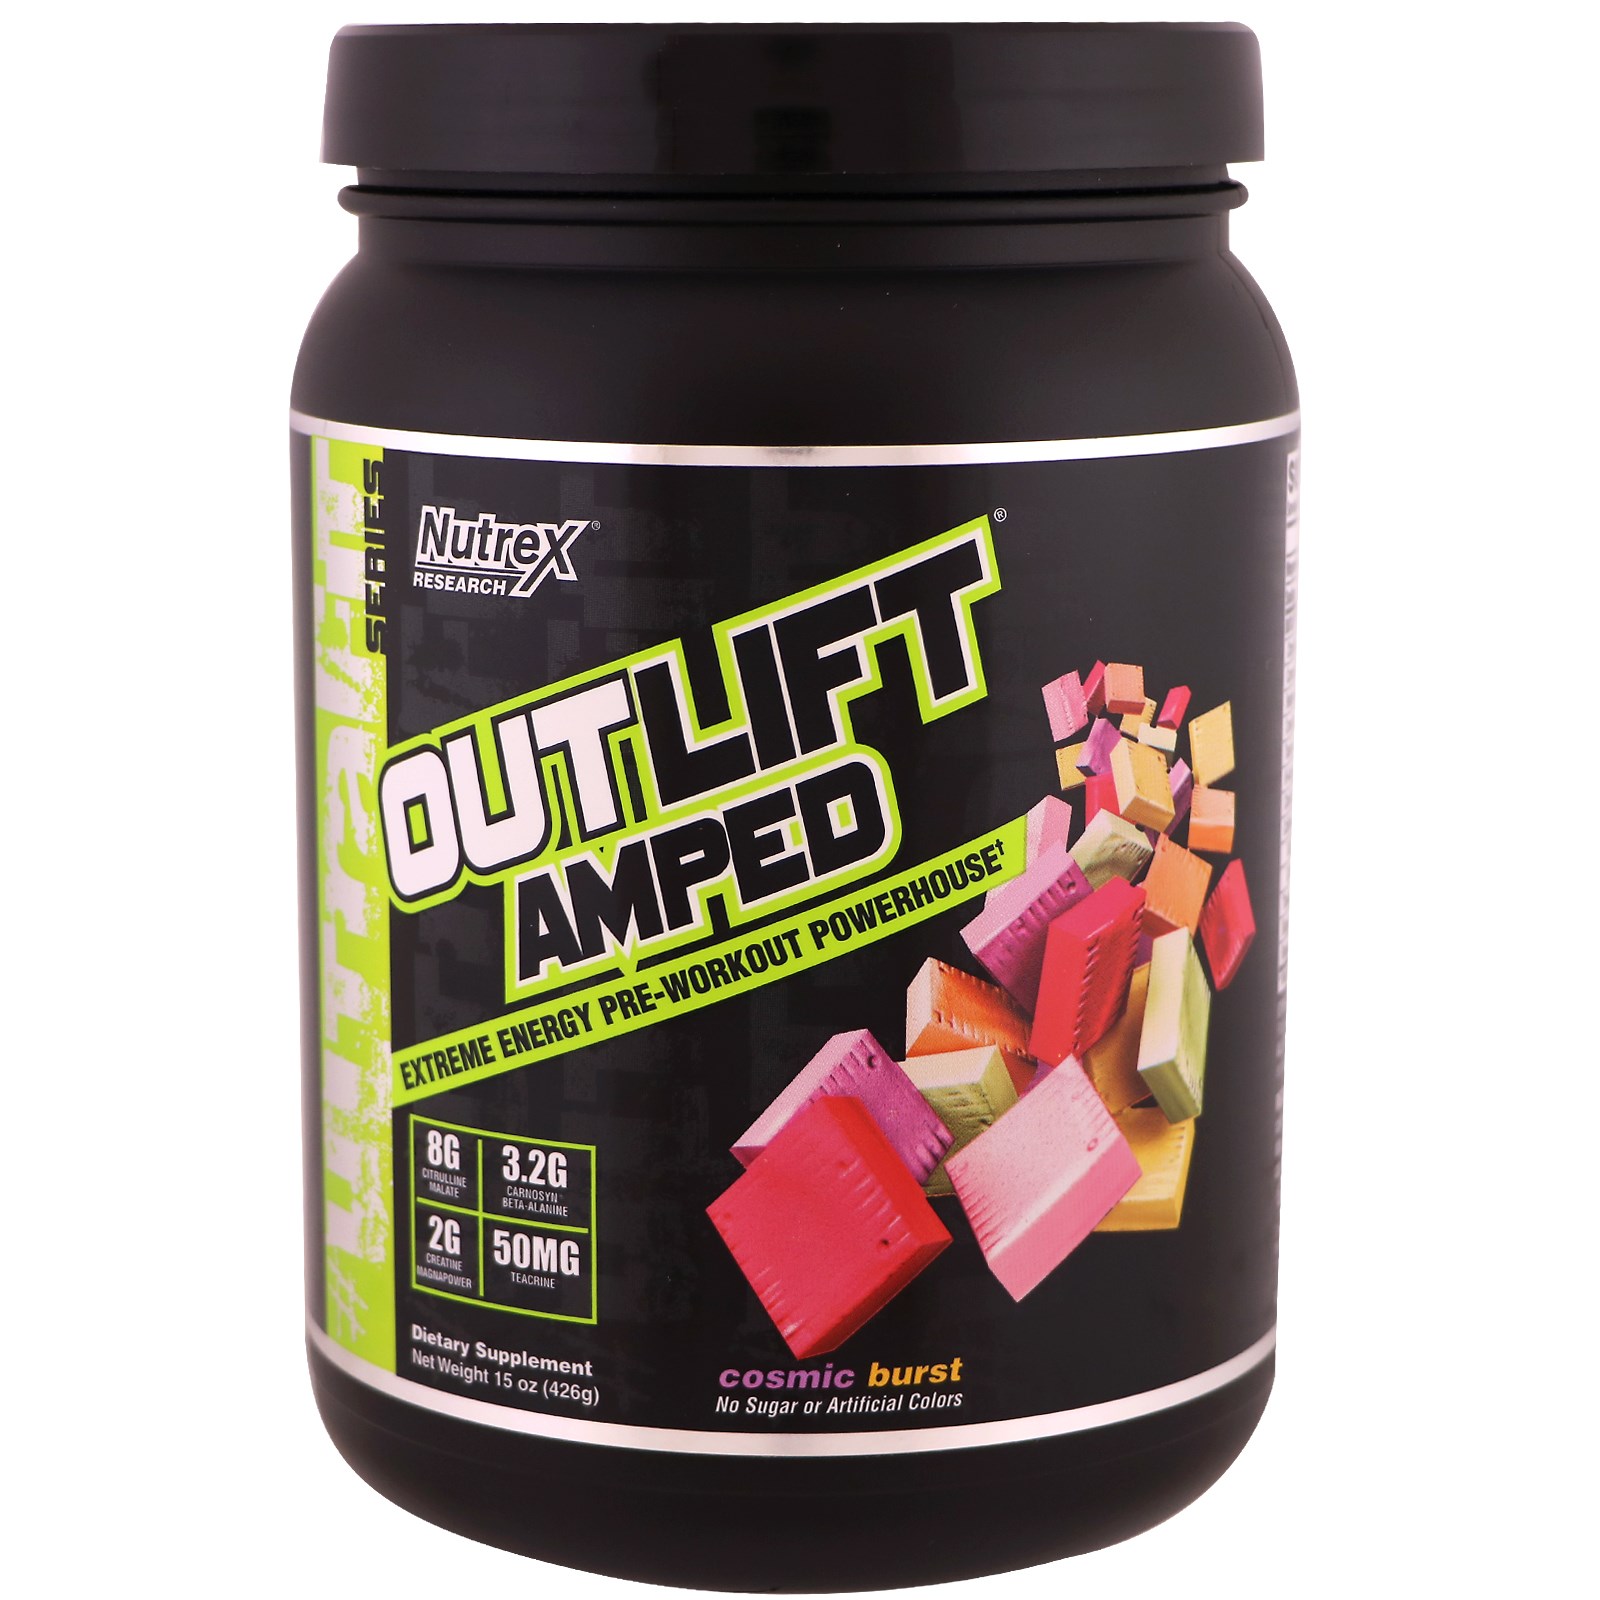 30 Minute Pre Workout Outlift for push your ABS